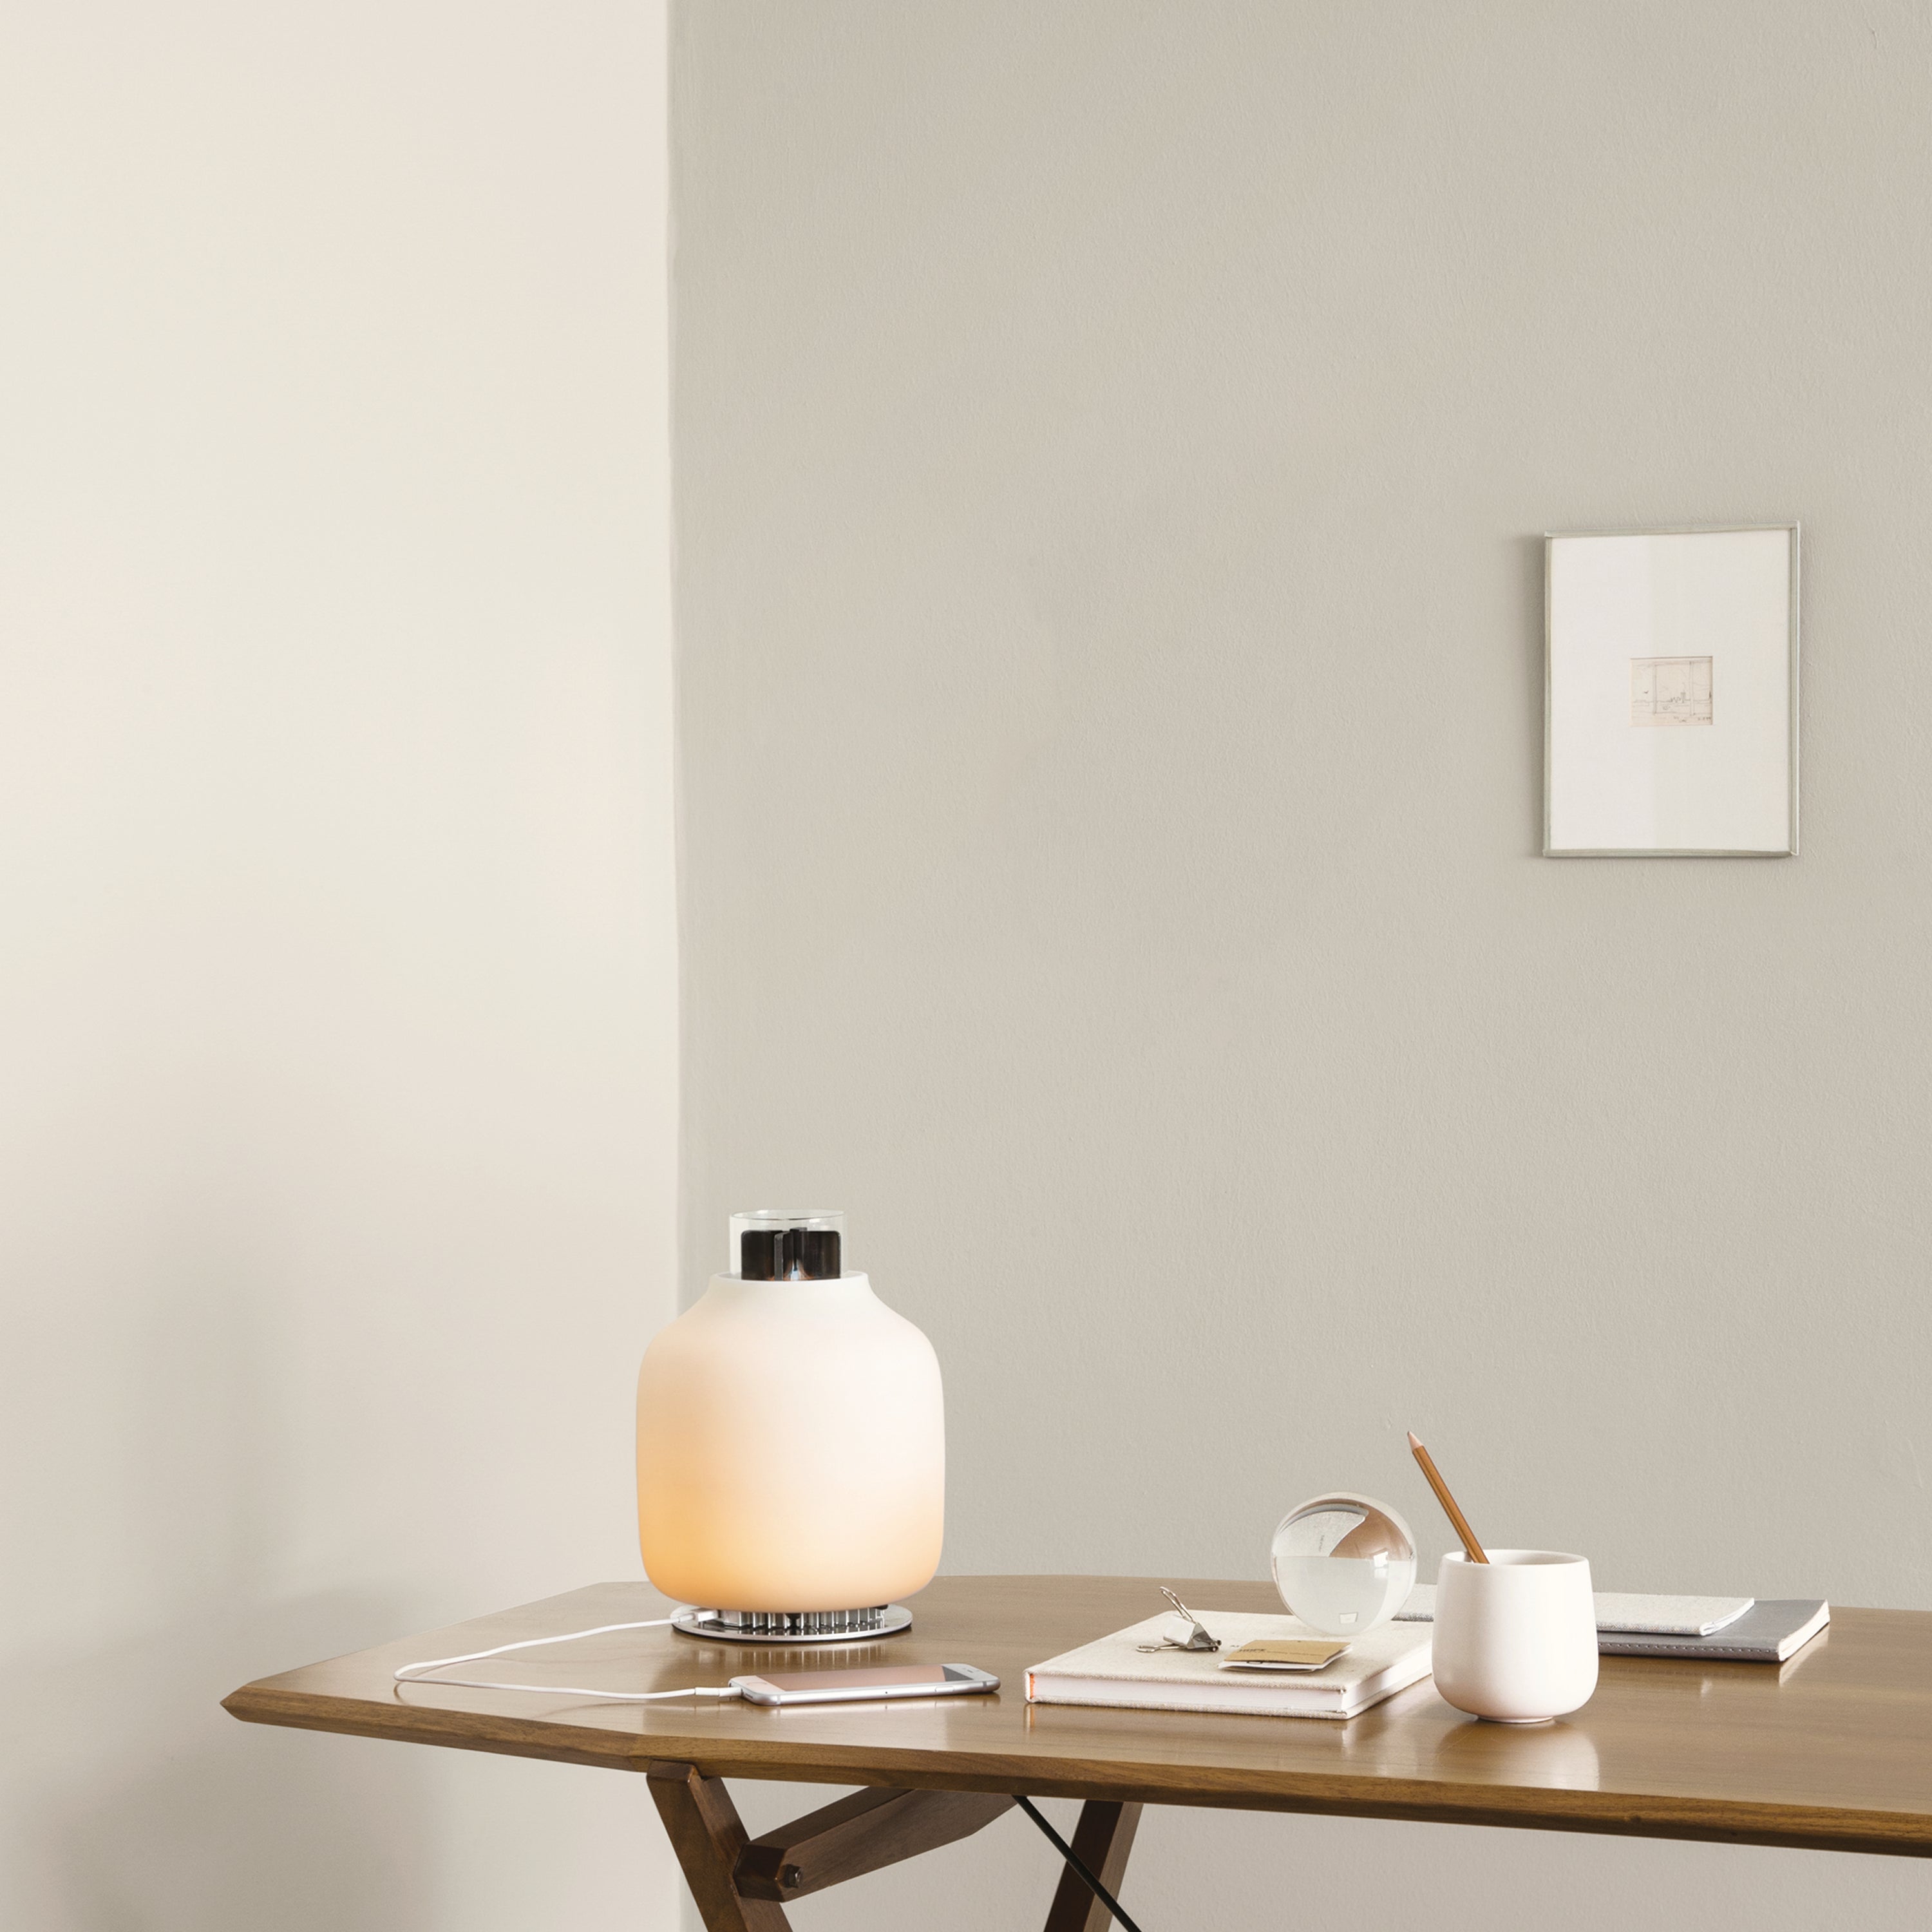 Candela Table Lamp with USB Charging Port